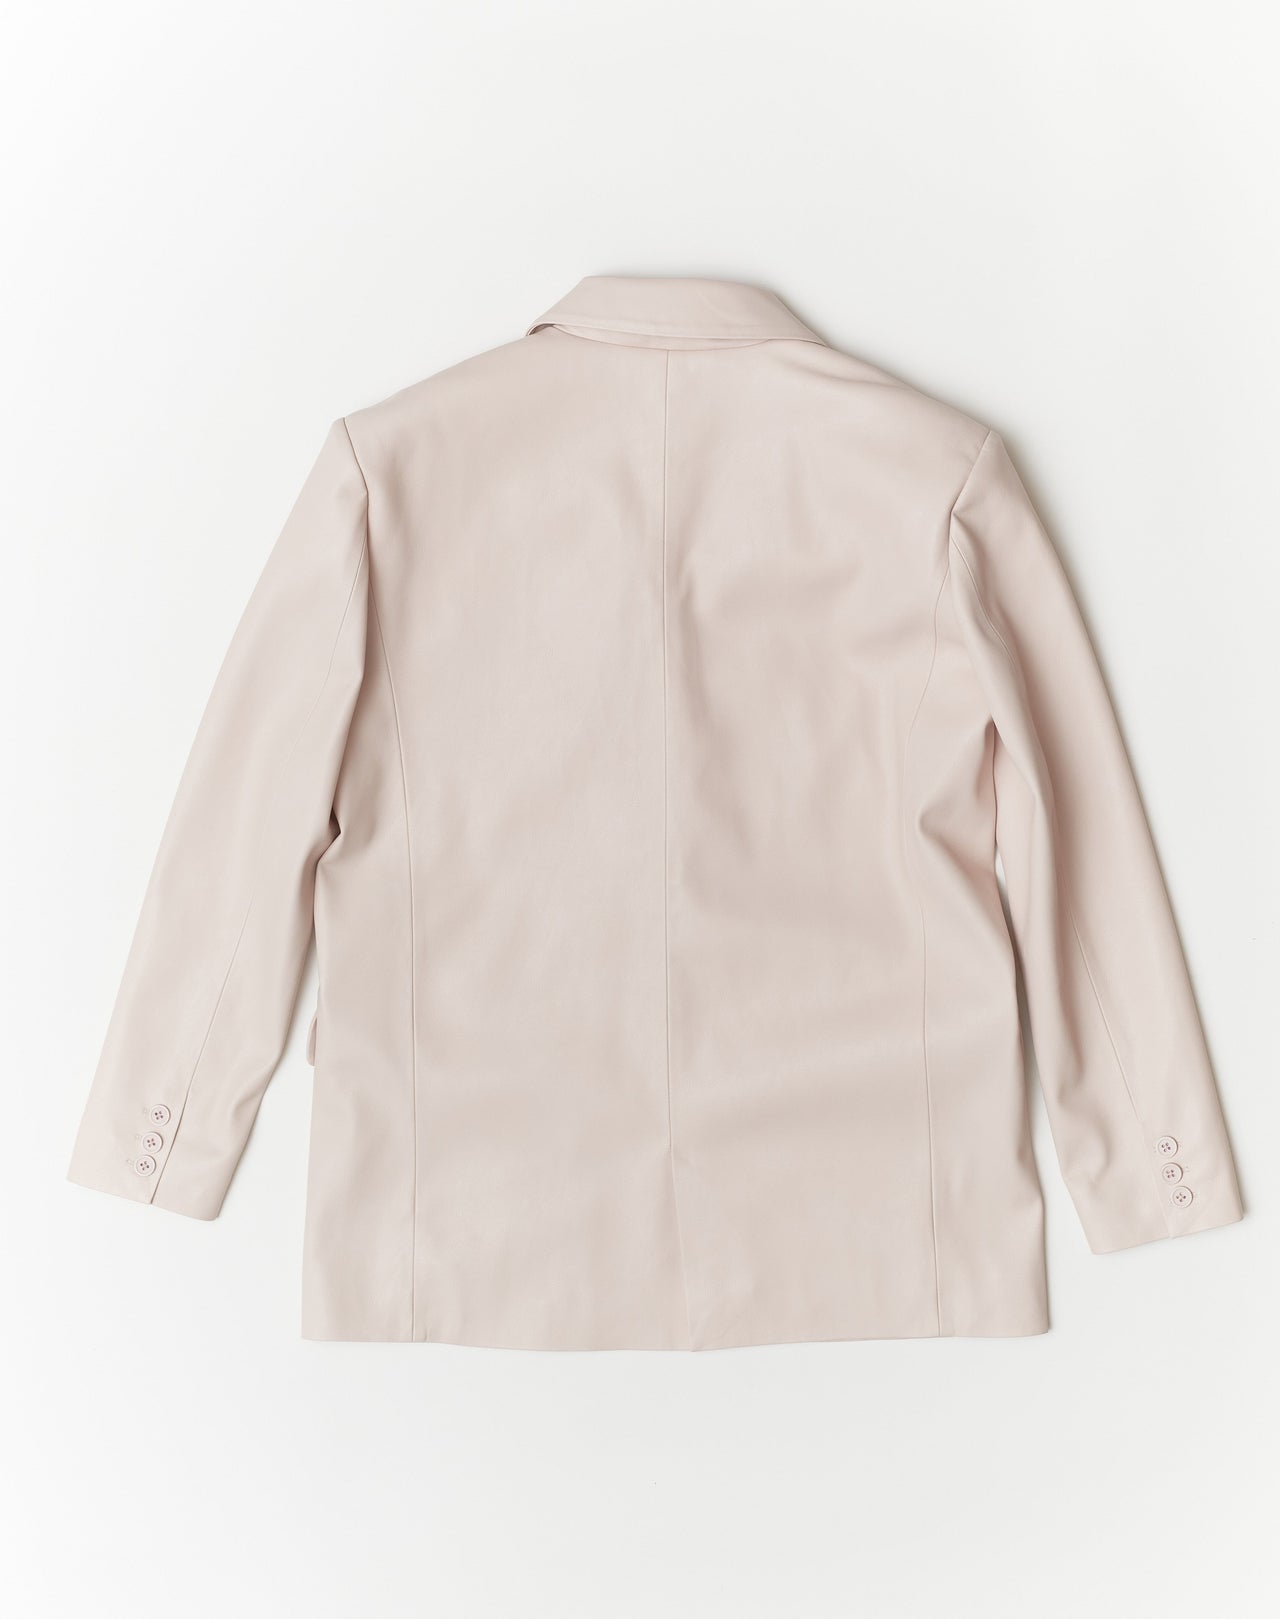 Never Alone Blazer Cream, Jacket by Blank NYC | LIT Boutique